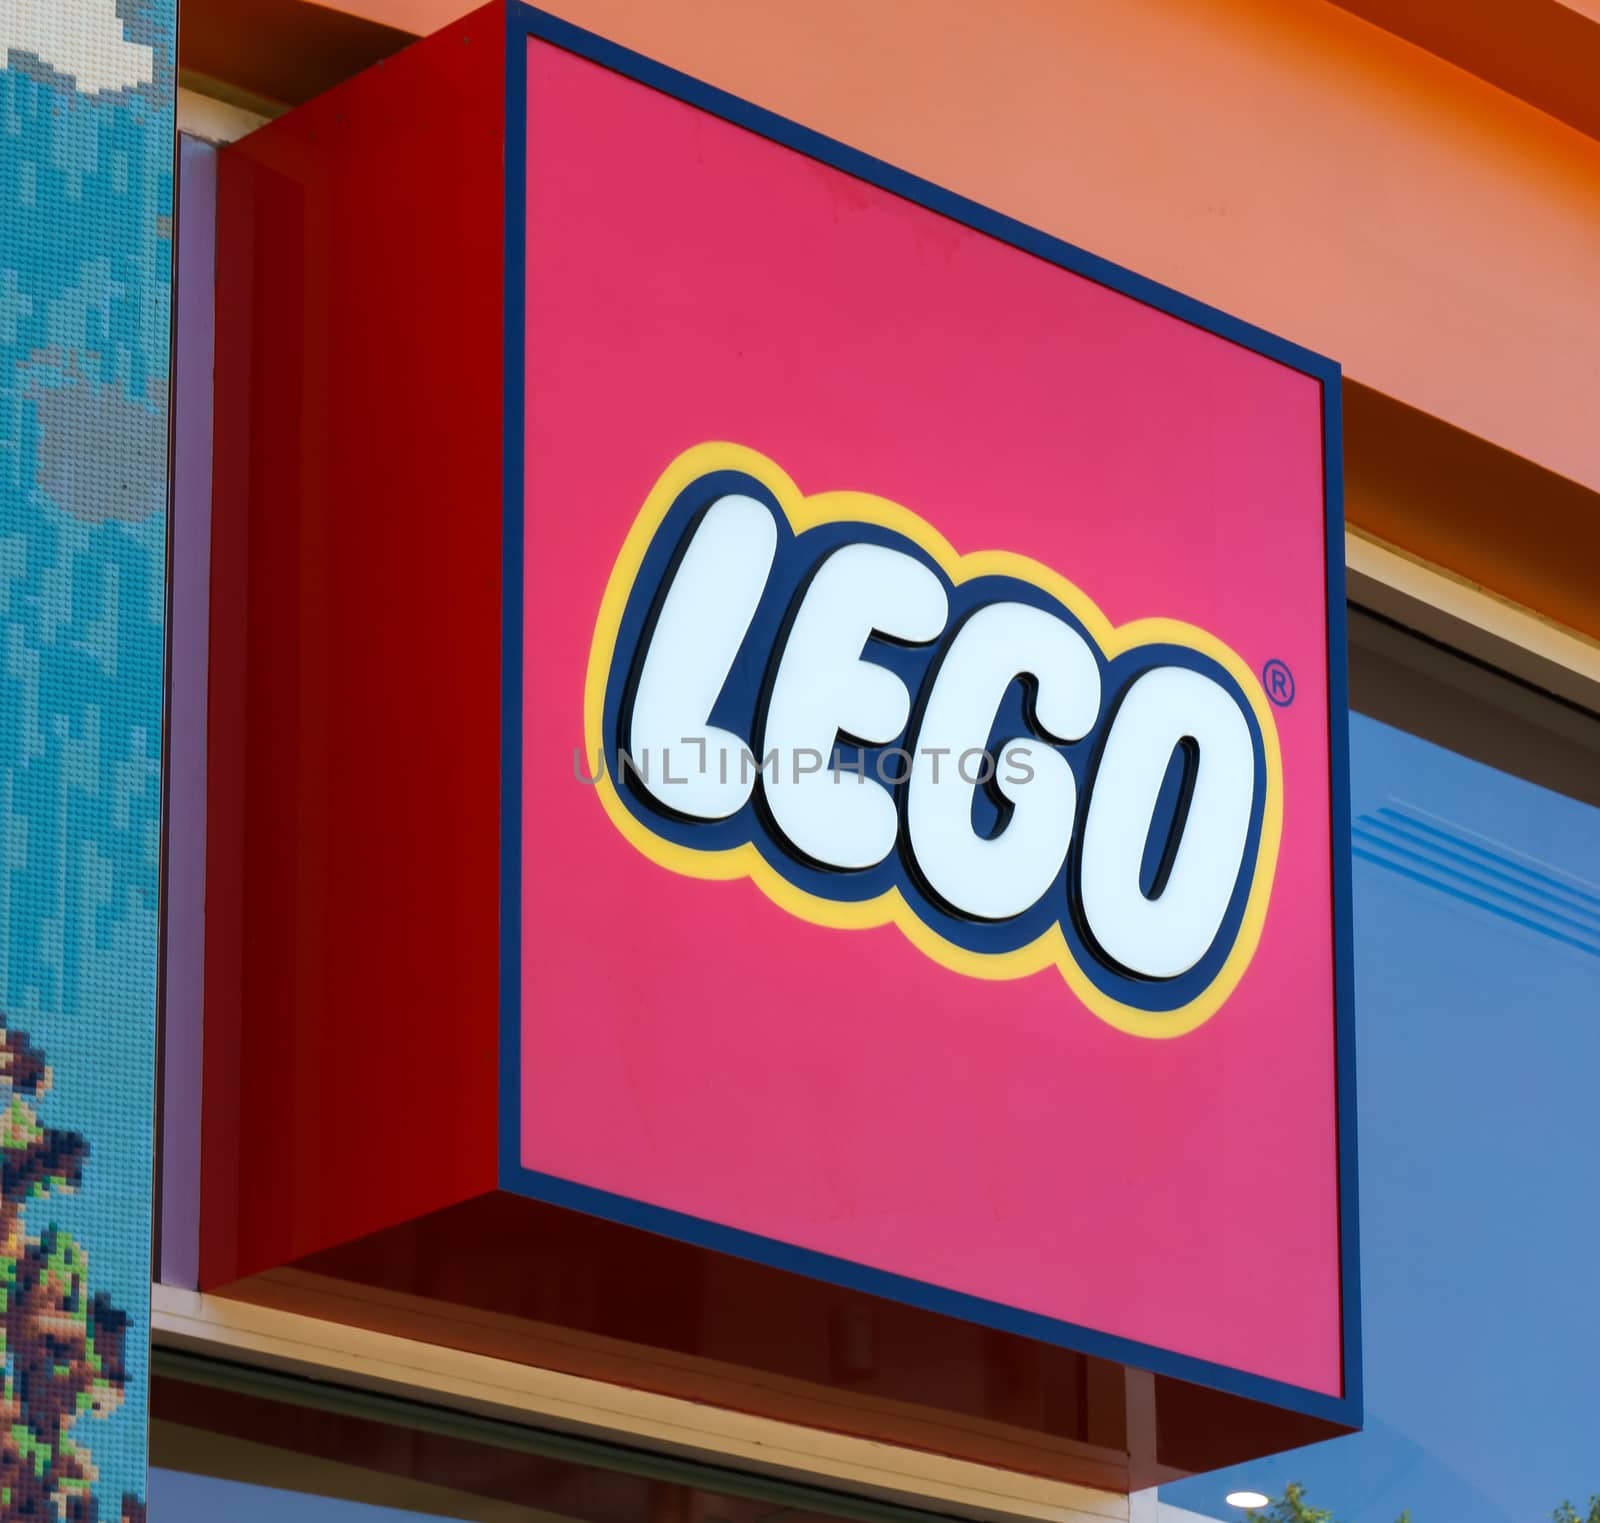 ANAHEIM, CA/USA - OCTOBER 10, 2015: Legloland store exterior at Downtown Disney. The Lego Group manufactuers of Lego brand toys.